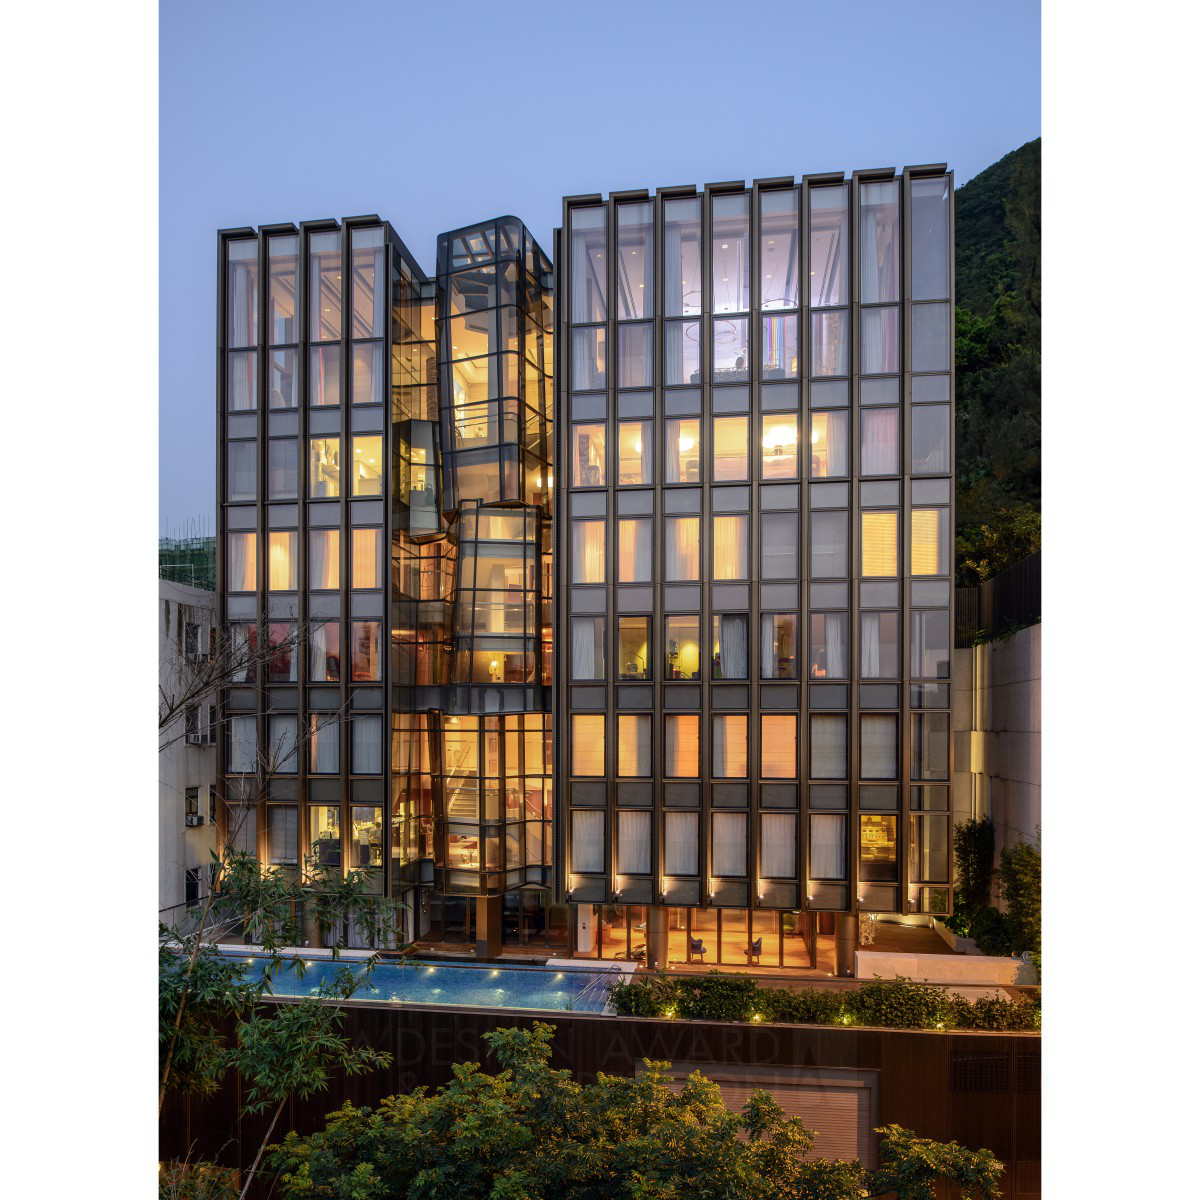 THR350 Architecture - Residential by Andrew Bromberg